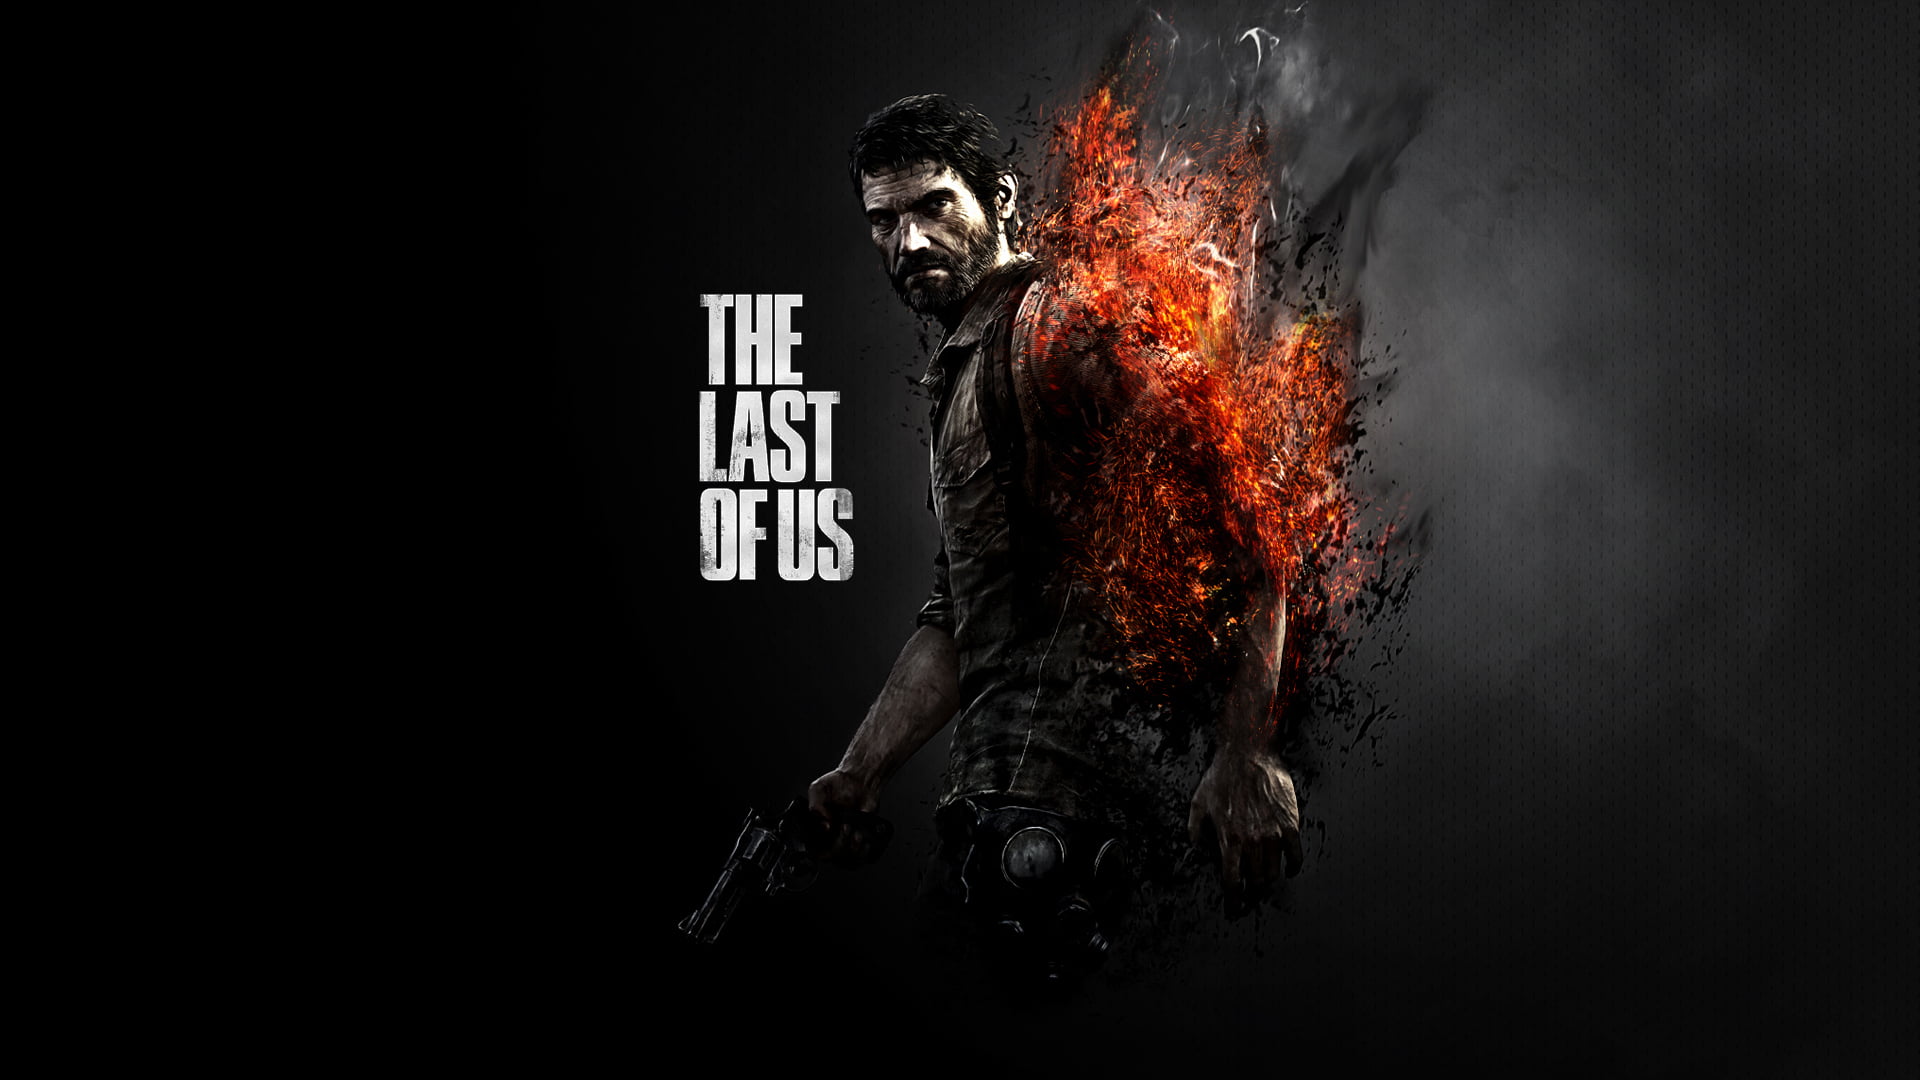 The Last of Us poster, Naughty Dog, PlayStation 3, Joel, Video Game